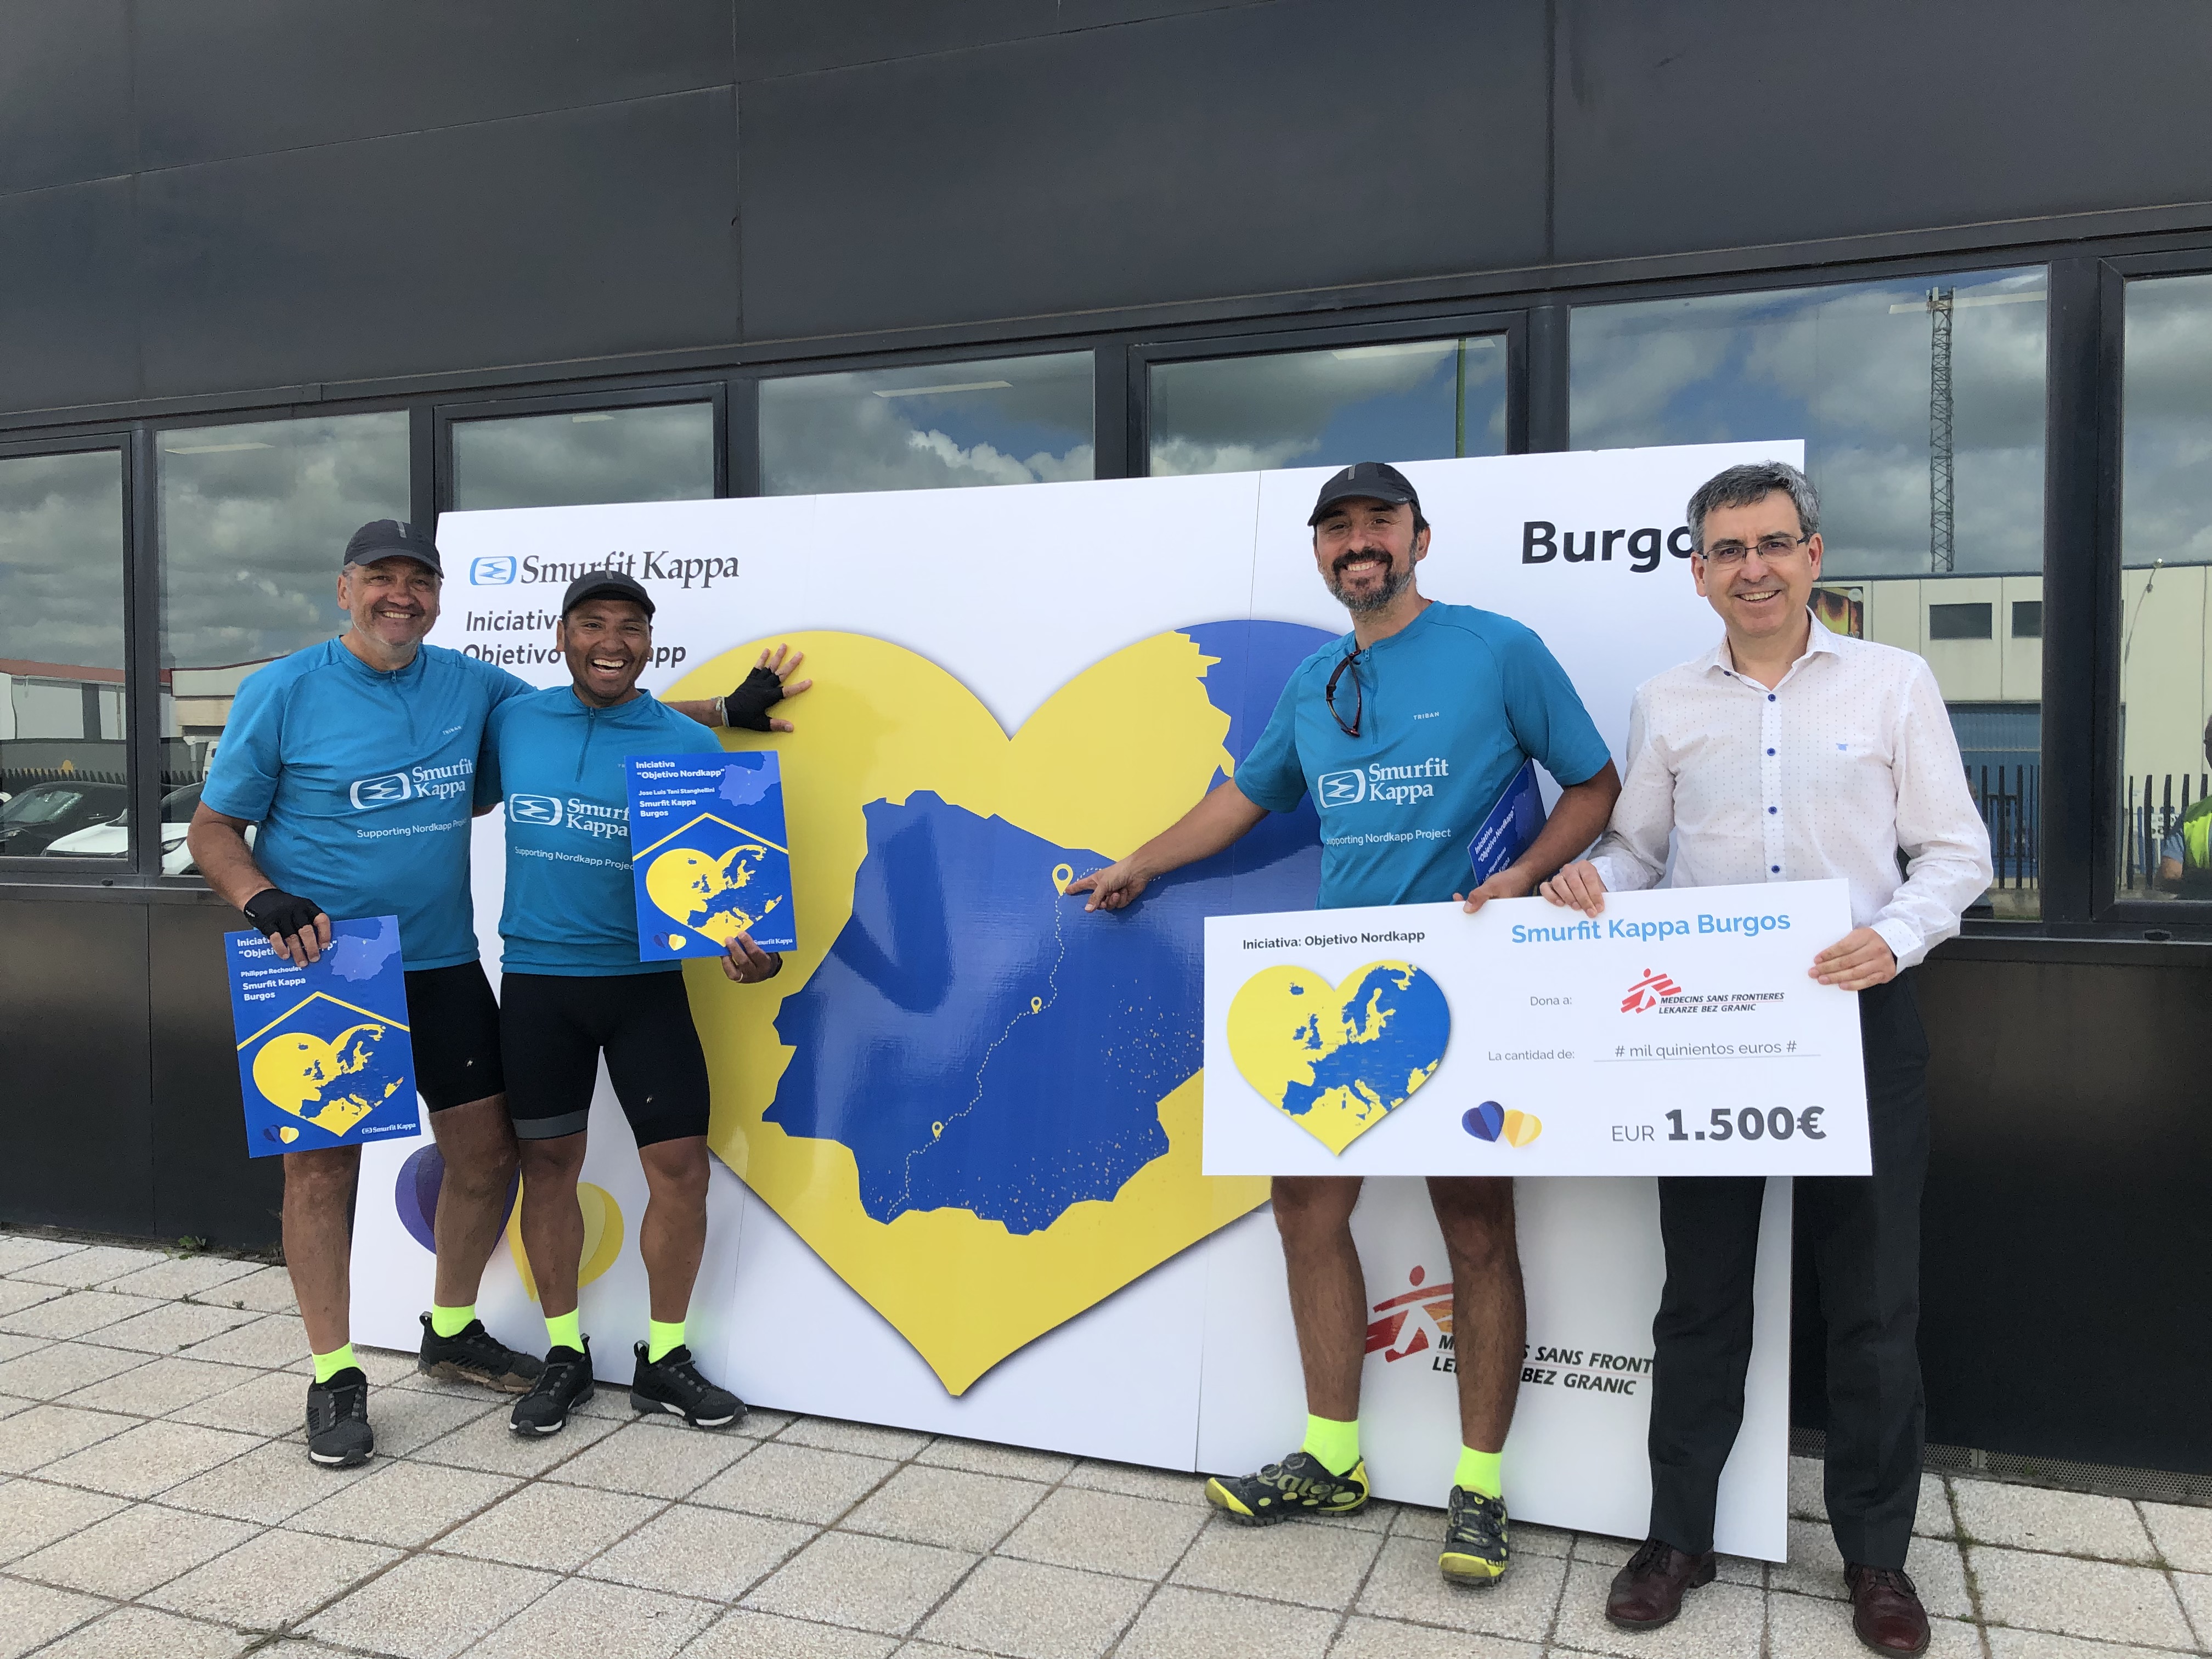 skrubbe Brokke sig miljø Smurfit Kappa on Twitter: "We're so proud of the progress our 3 cyclists  have made so far! This was in SK Burgos where they enjoyed some rest &amp;  local cuisine! They continue